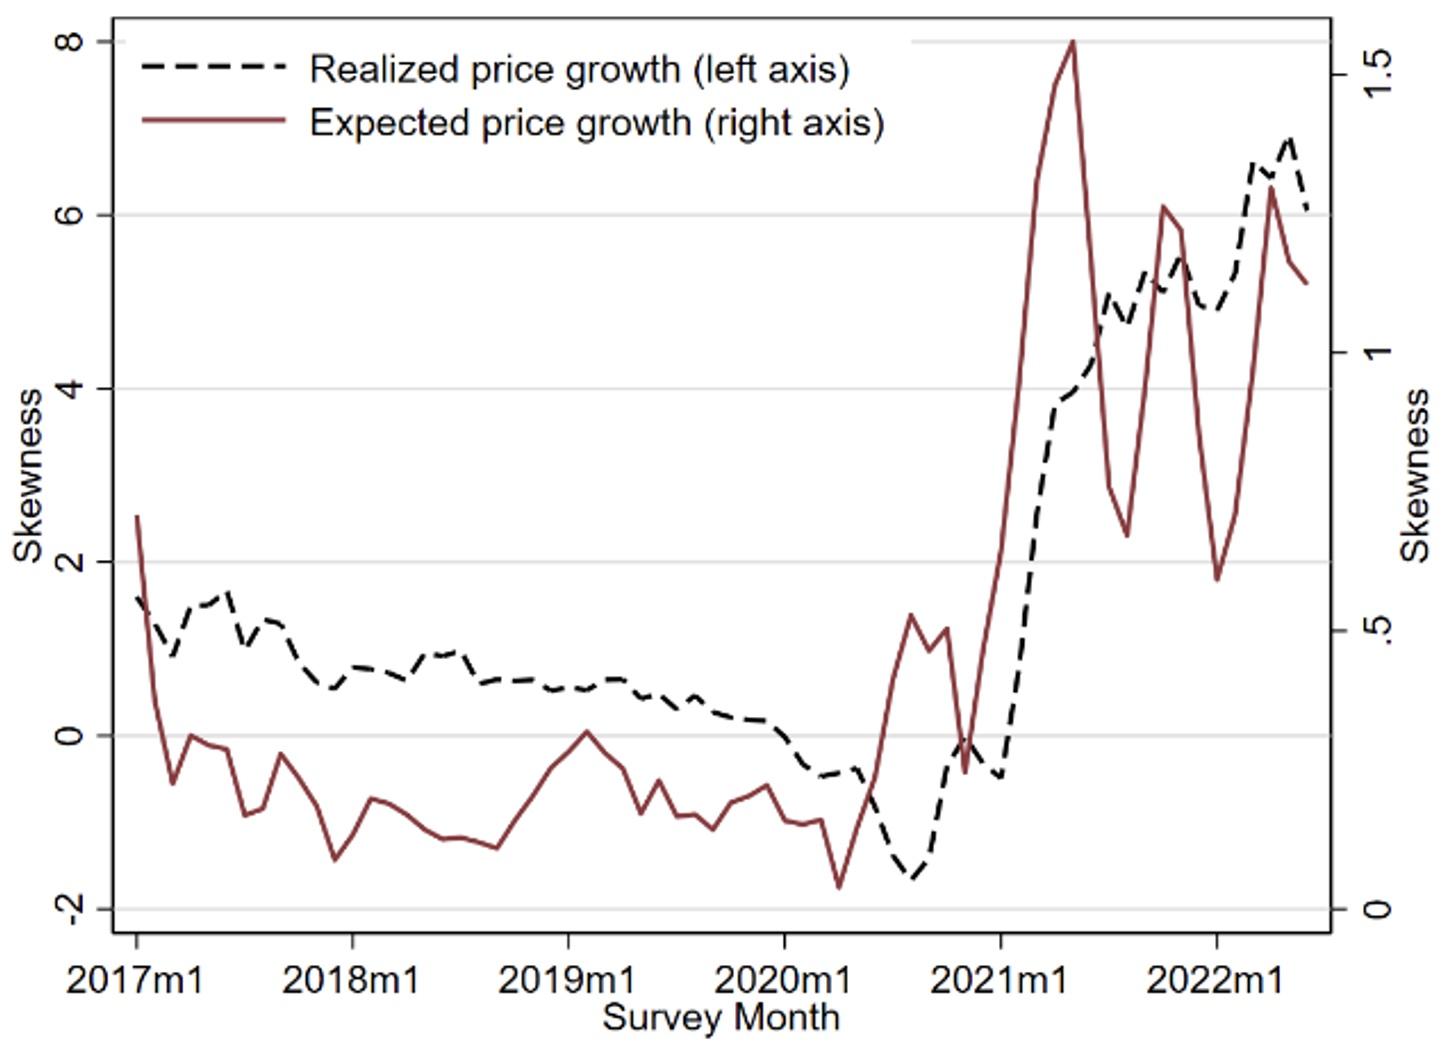 Standard deviation and skewness of realised price inflation  Panel A) Skewness